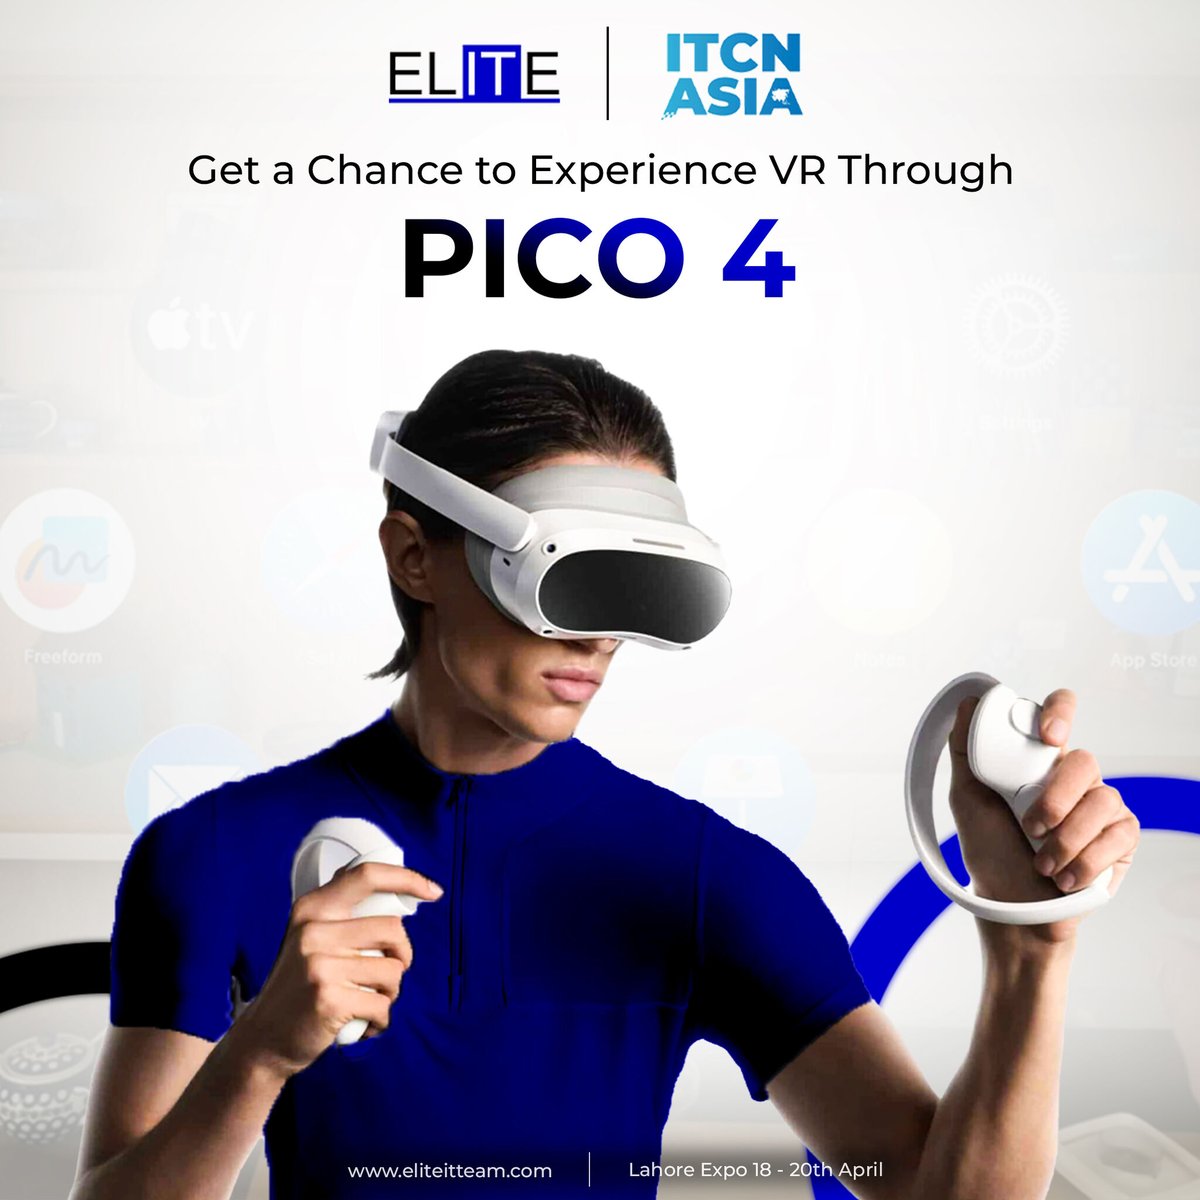 Step into the future of virtual reality with Pico 4 at ITCN 2024! Immerse yourself in new experiences. Don't miss this exclusive opportunity to elevate your reality! 

𝗘𝗹𝗶𝘁𝗲 𝗜𝗧 𝗧𝗲𝗮𝗺 𝗟𝗶𝗺𝗶𝘁𝗲𝗱
eliteitteam.com 

#VRExperience #Pico4 #ITCN2024